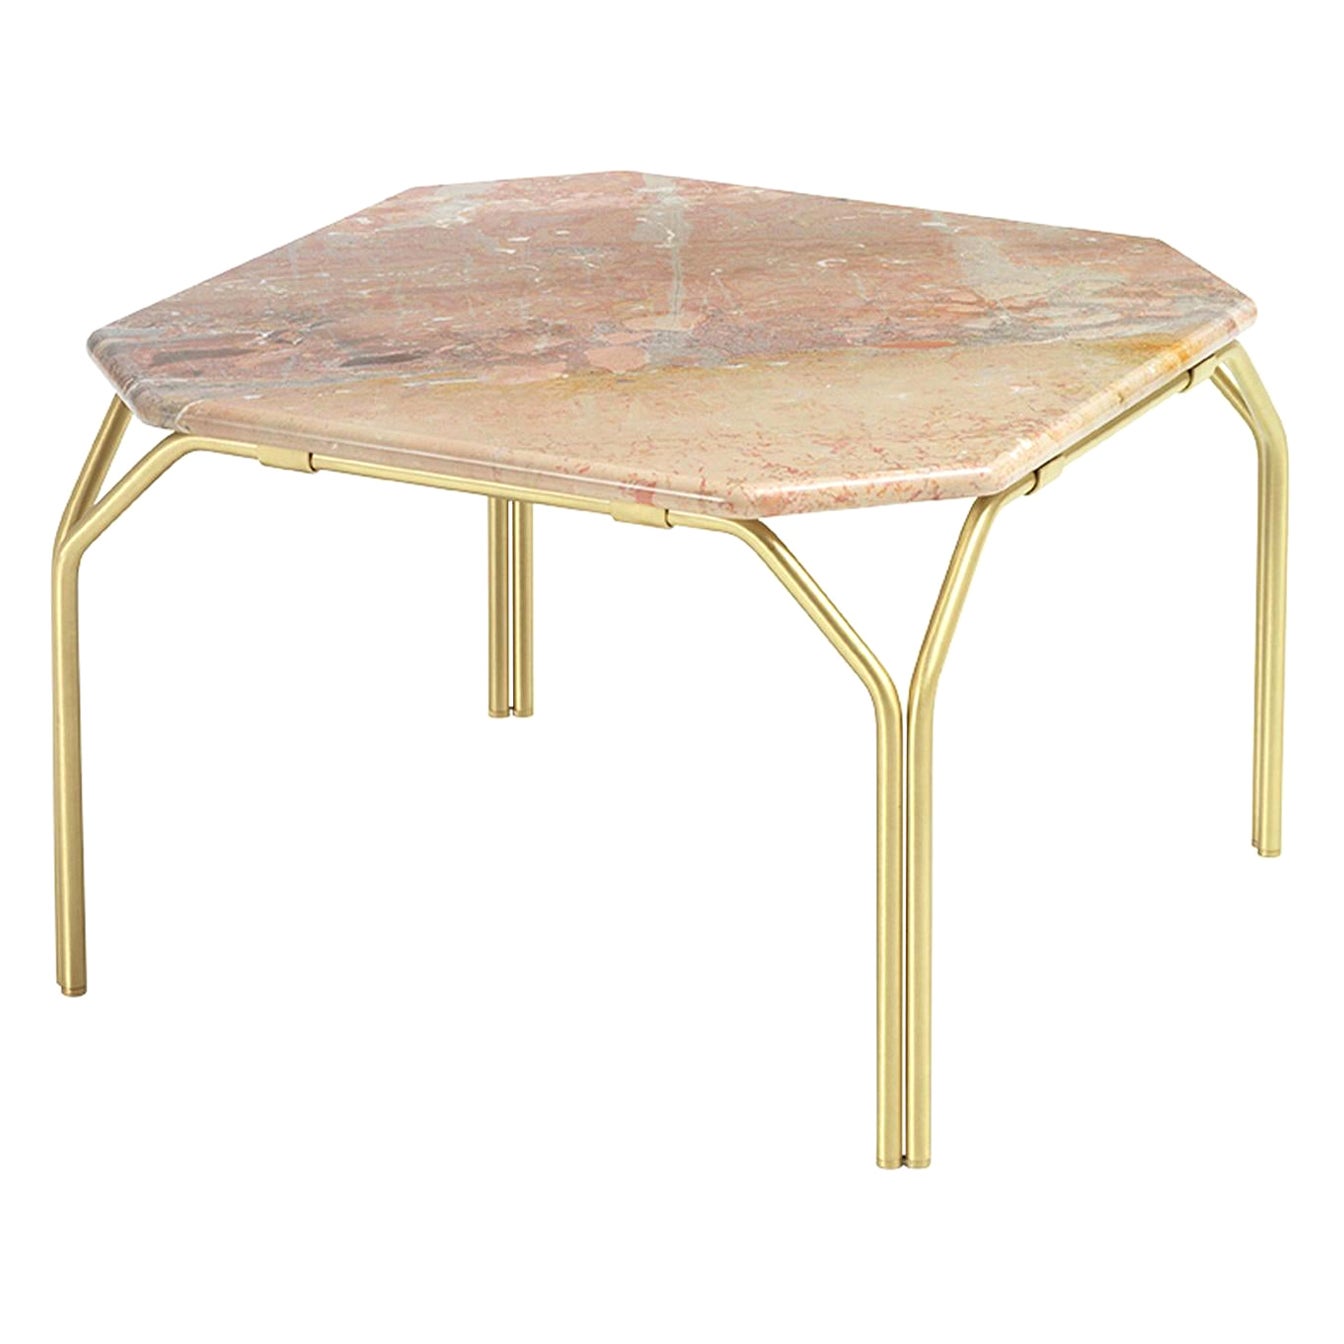 Colette Small Table by Daytona For Sale